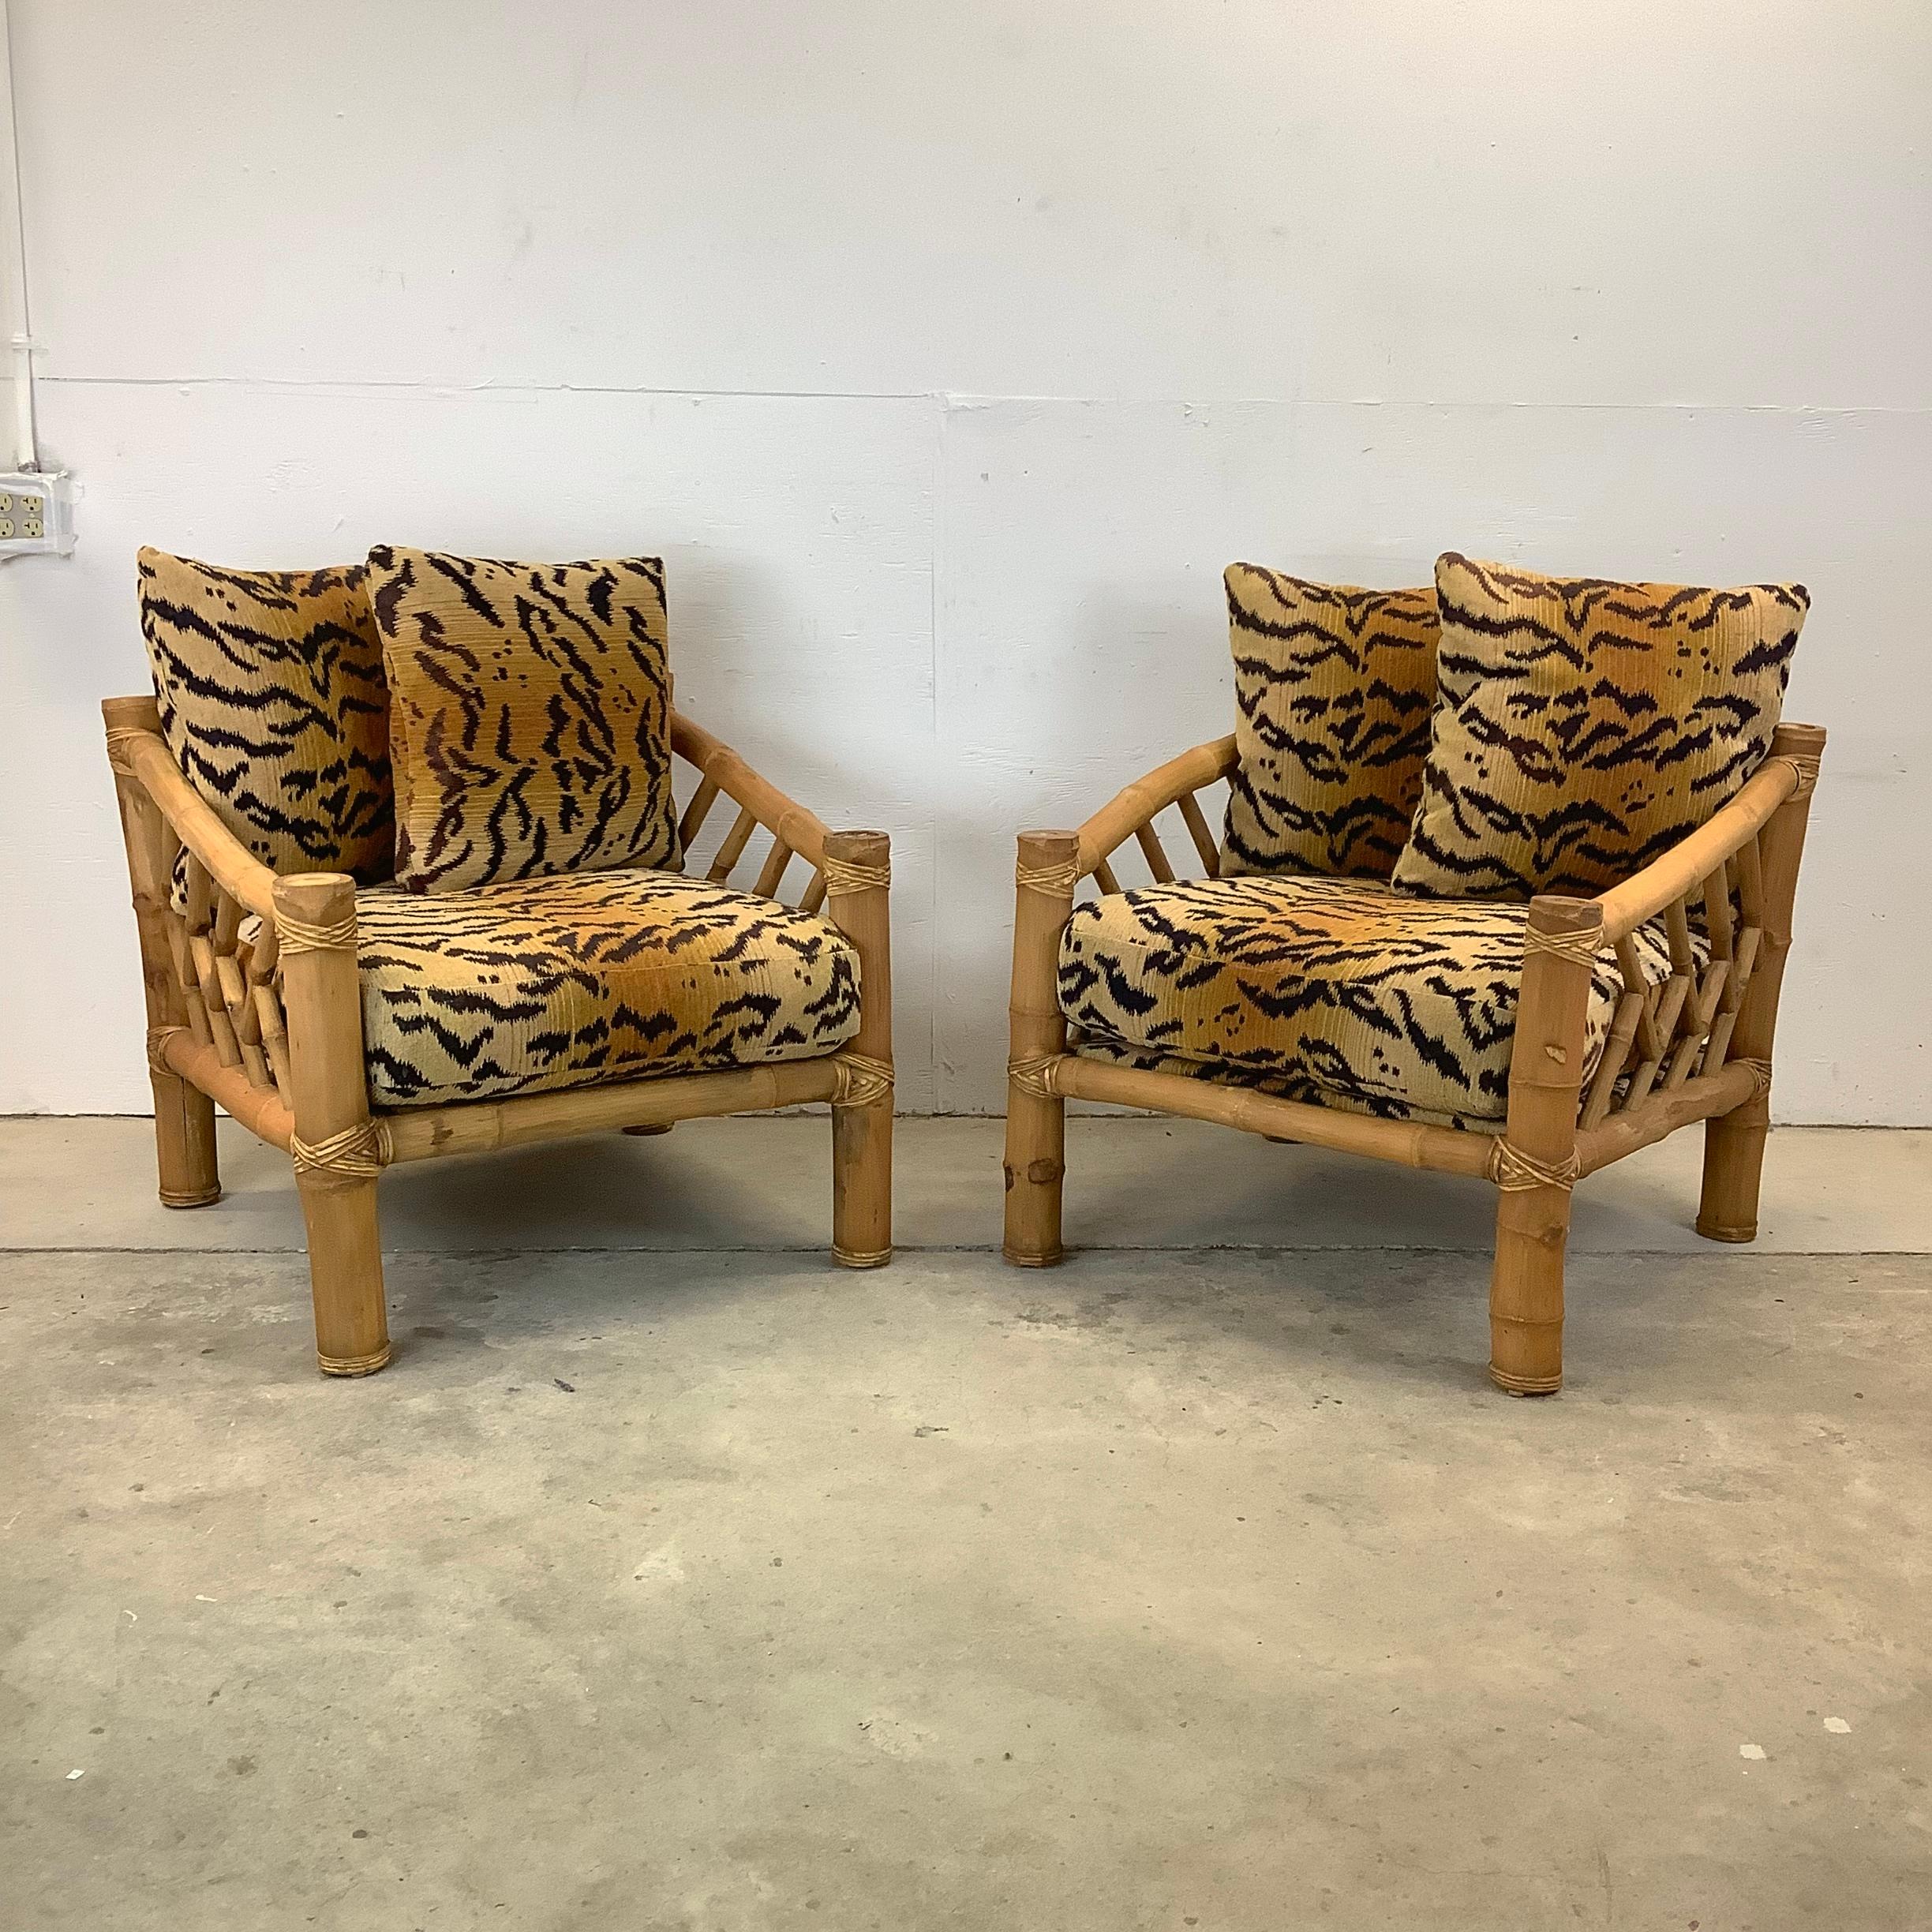 Other Pair Vintage Bamboo Armchairs & Ottoman in Tiger Print